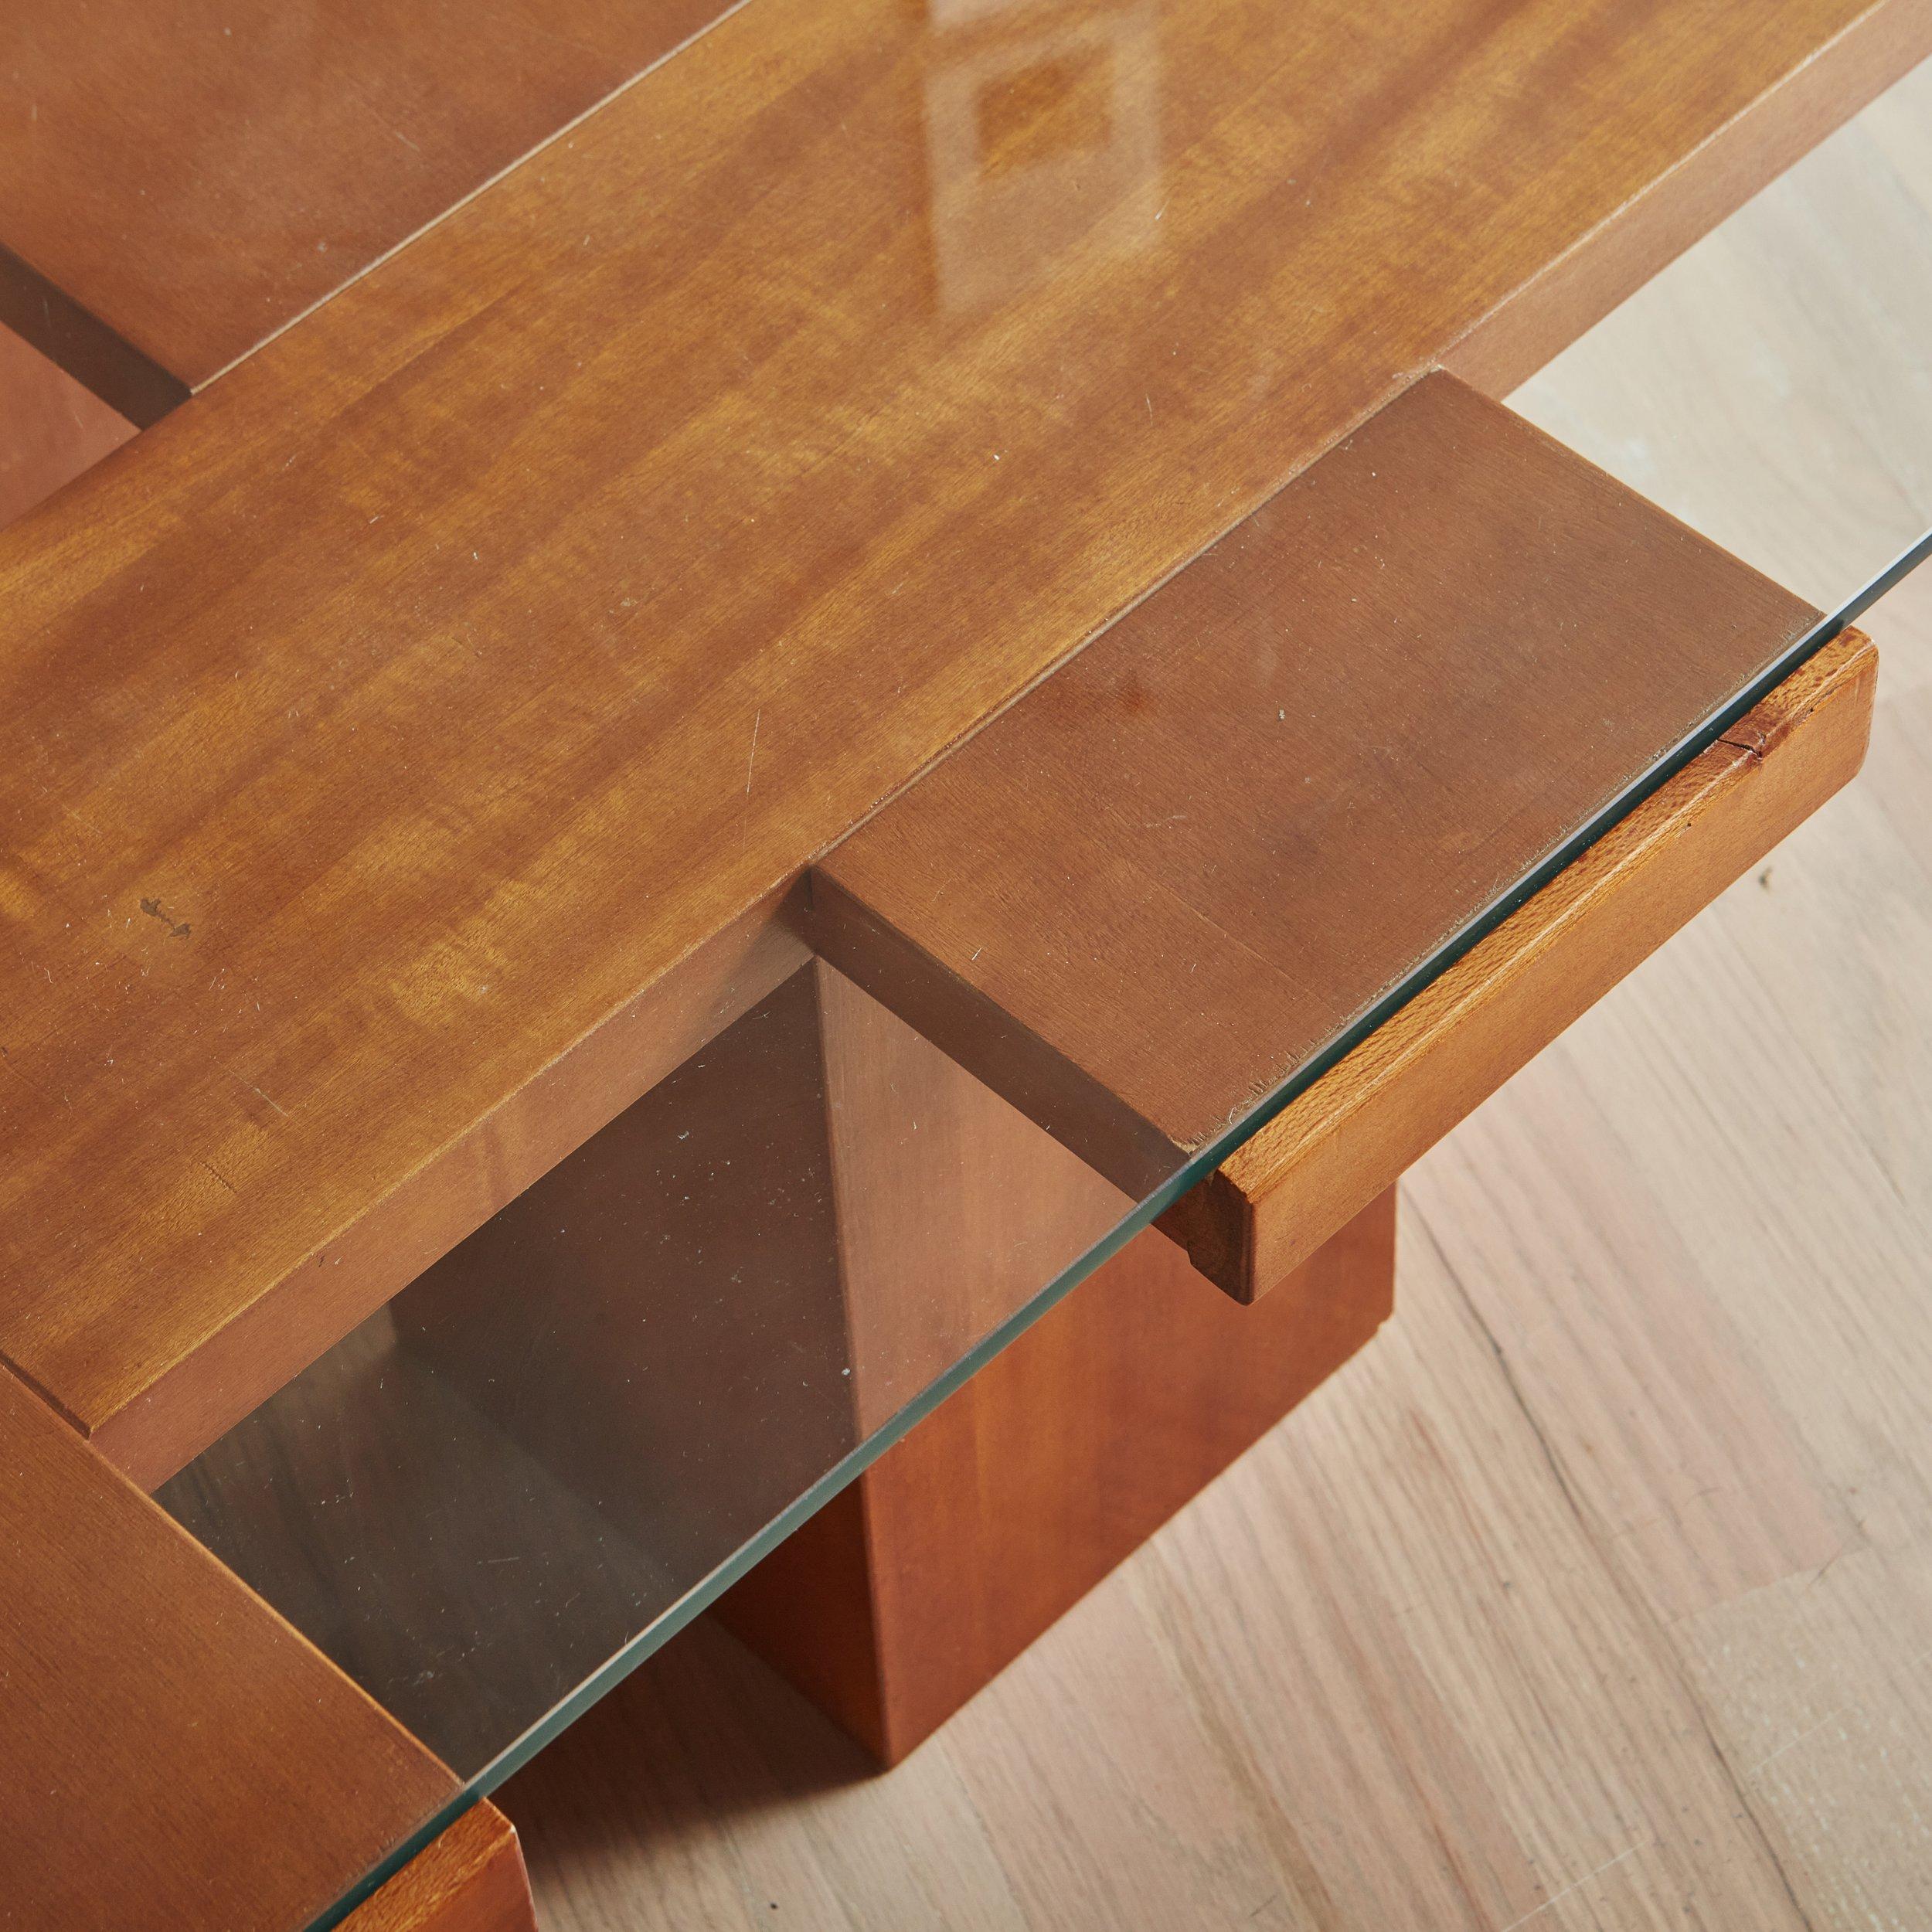 Italian Ash Wood + Glass Coffee Table Attributed to Marco Zanuso for Poggi, Italy 1960s For Sale